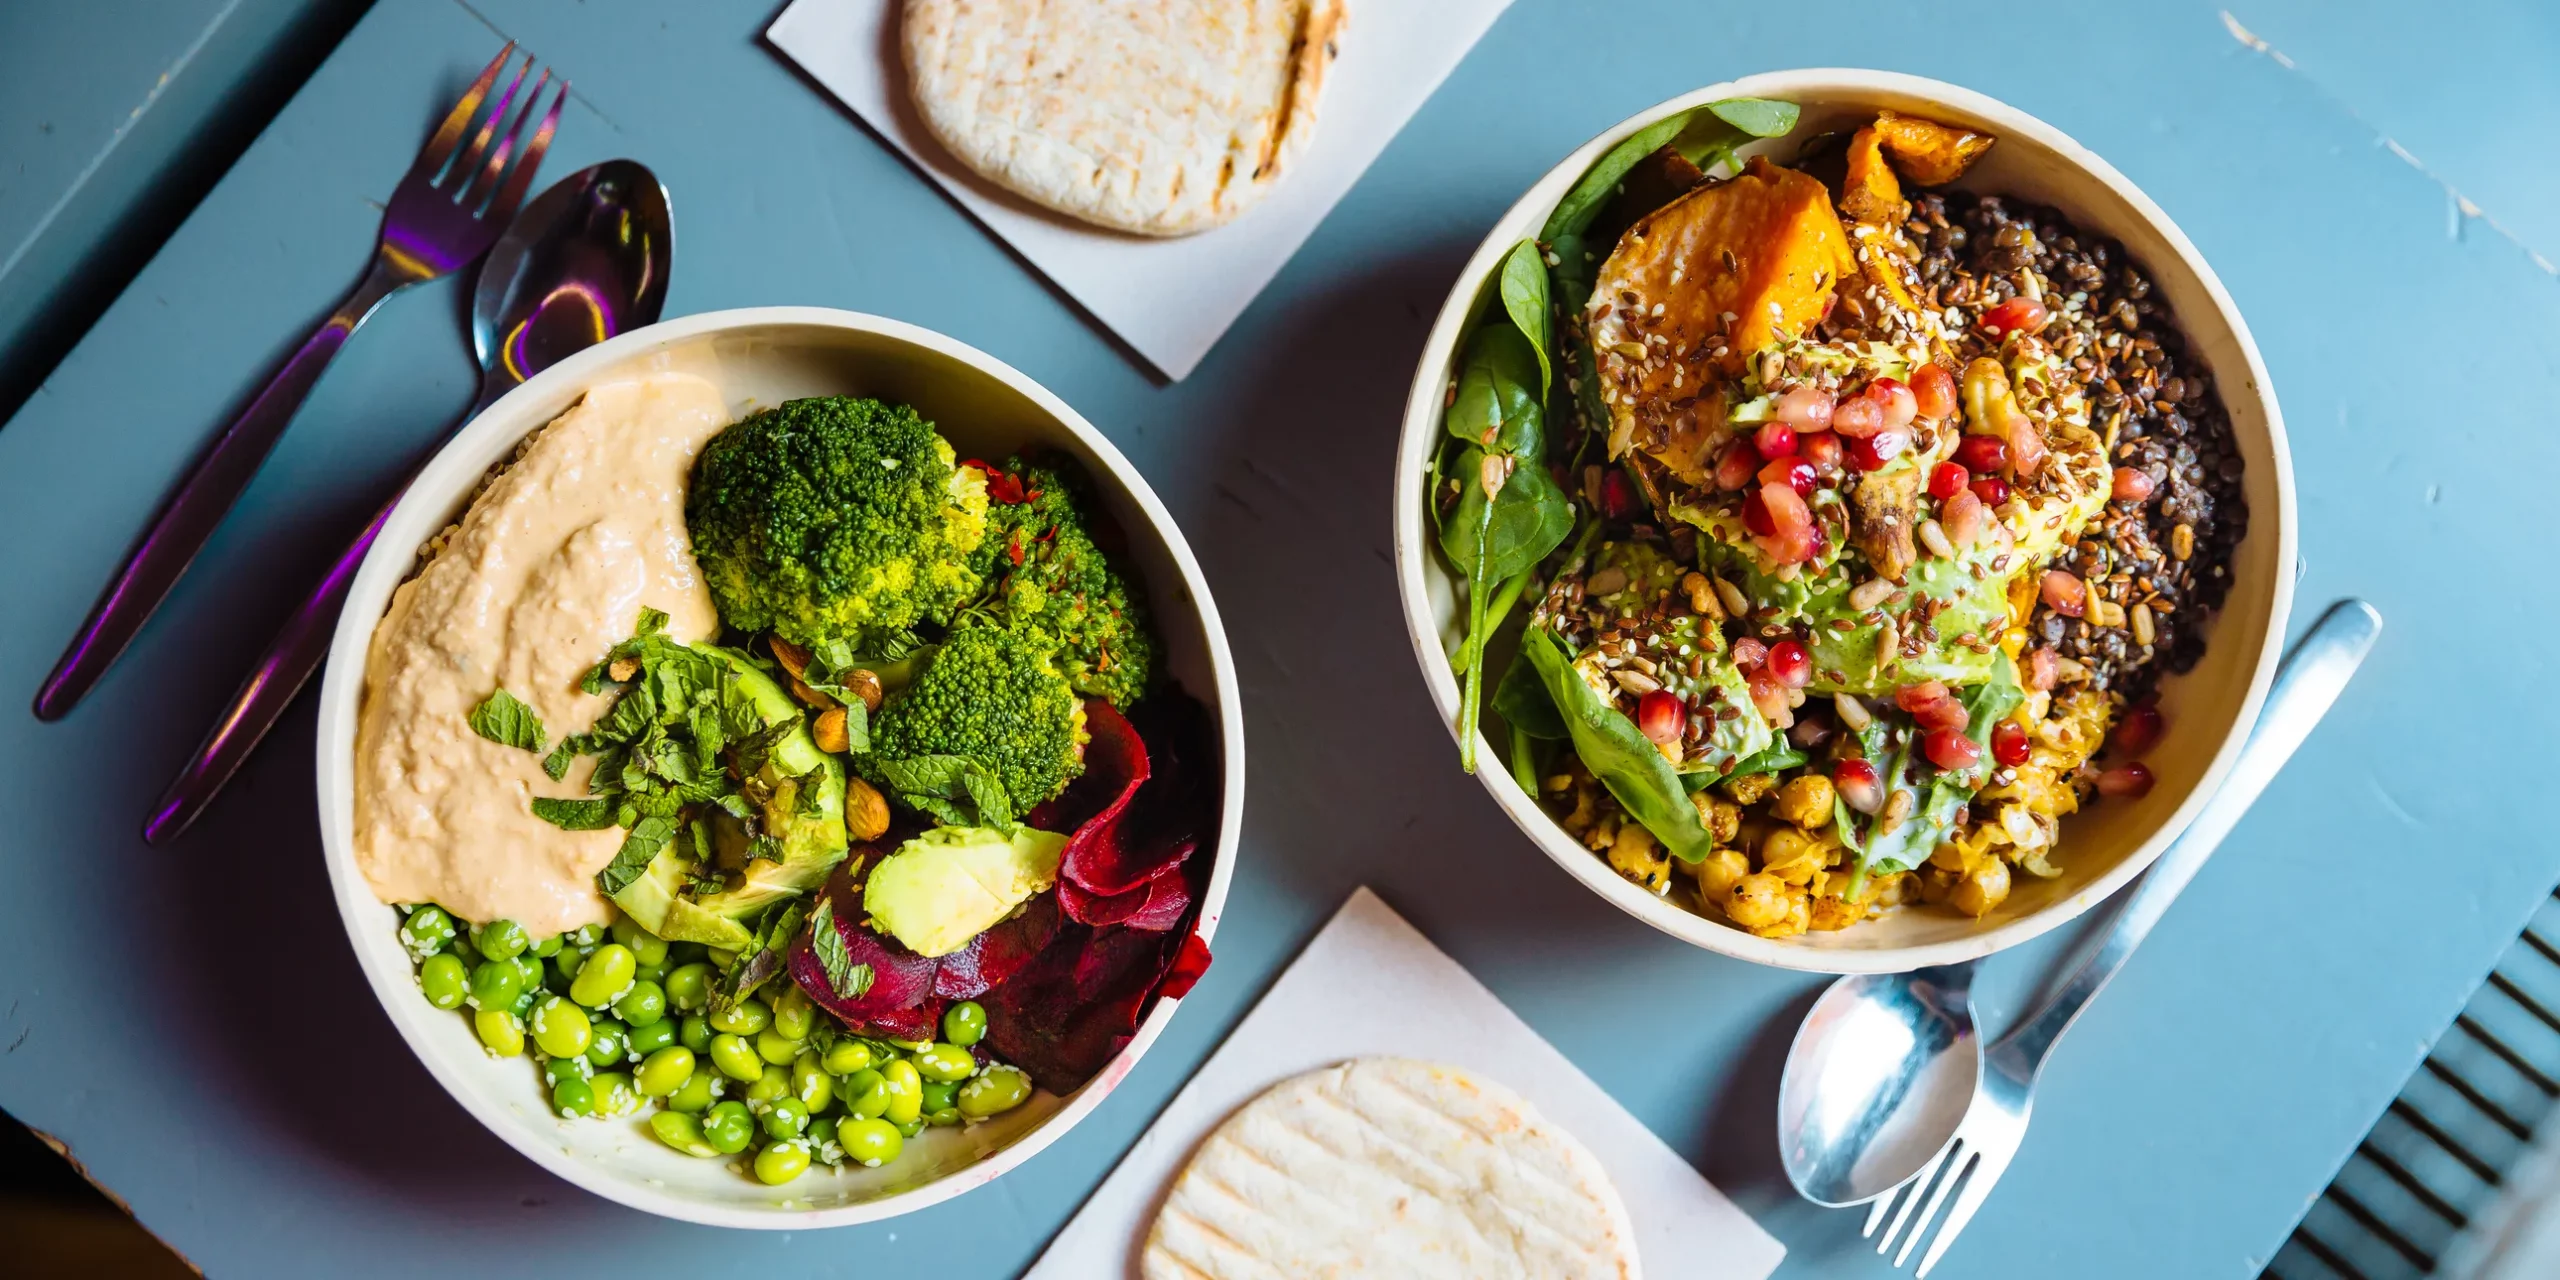 The 10 best Vegetarian Meal Plans to fuel your workouts